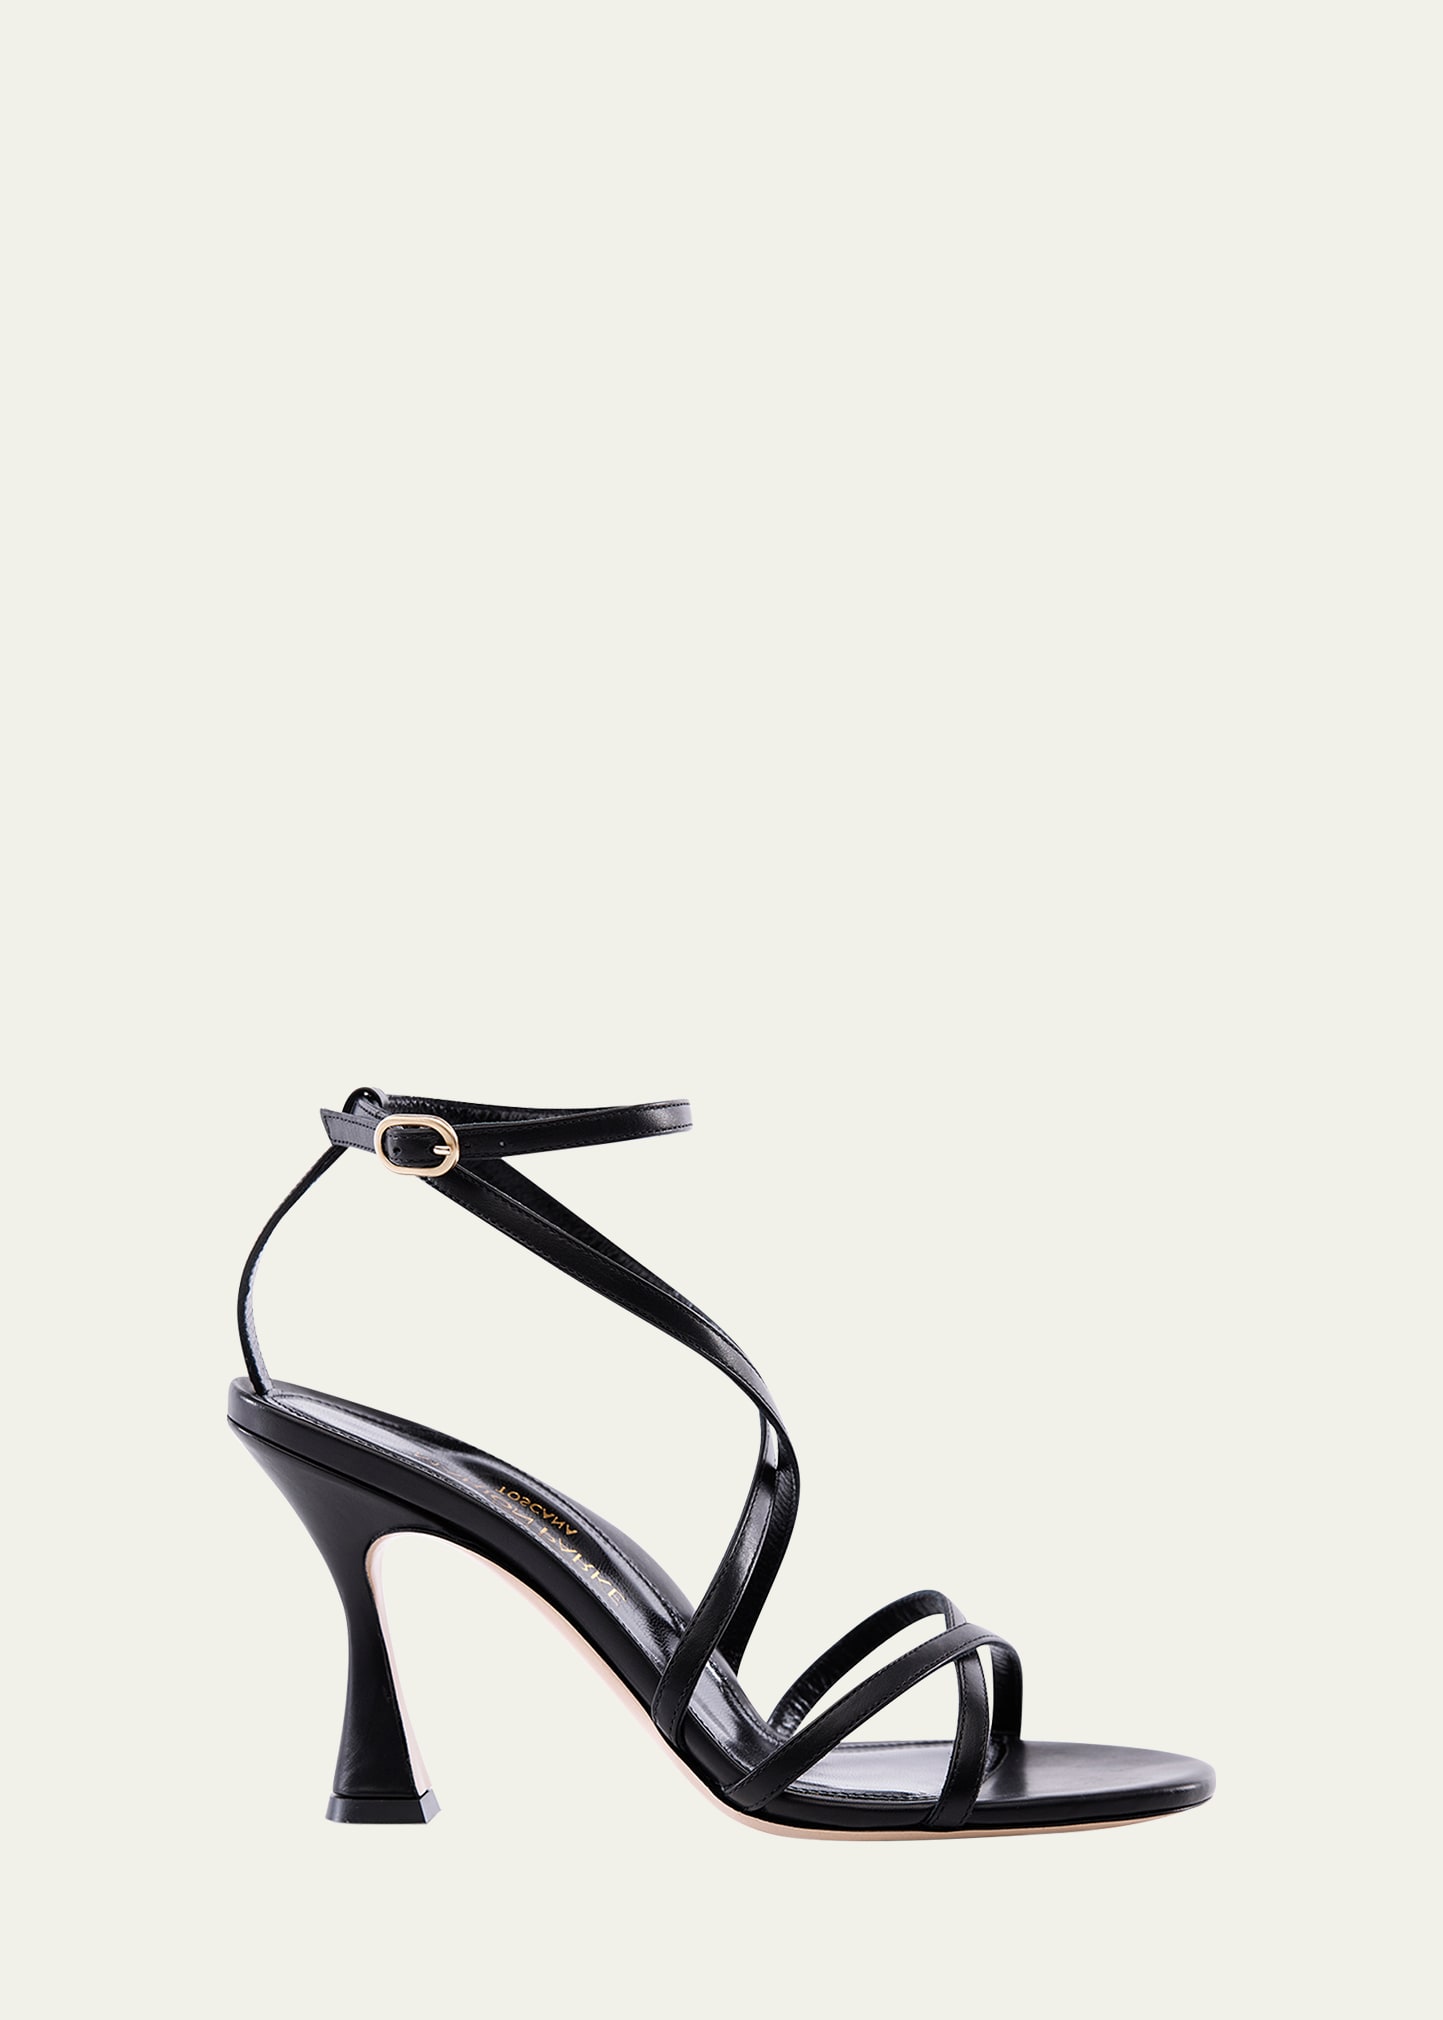 Marion Parke Lottie Leather Strappy Sandals